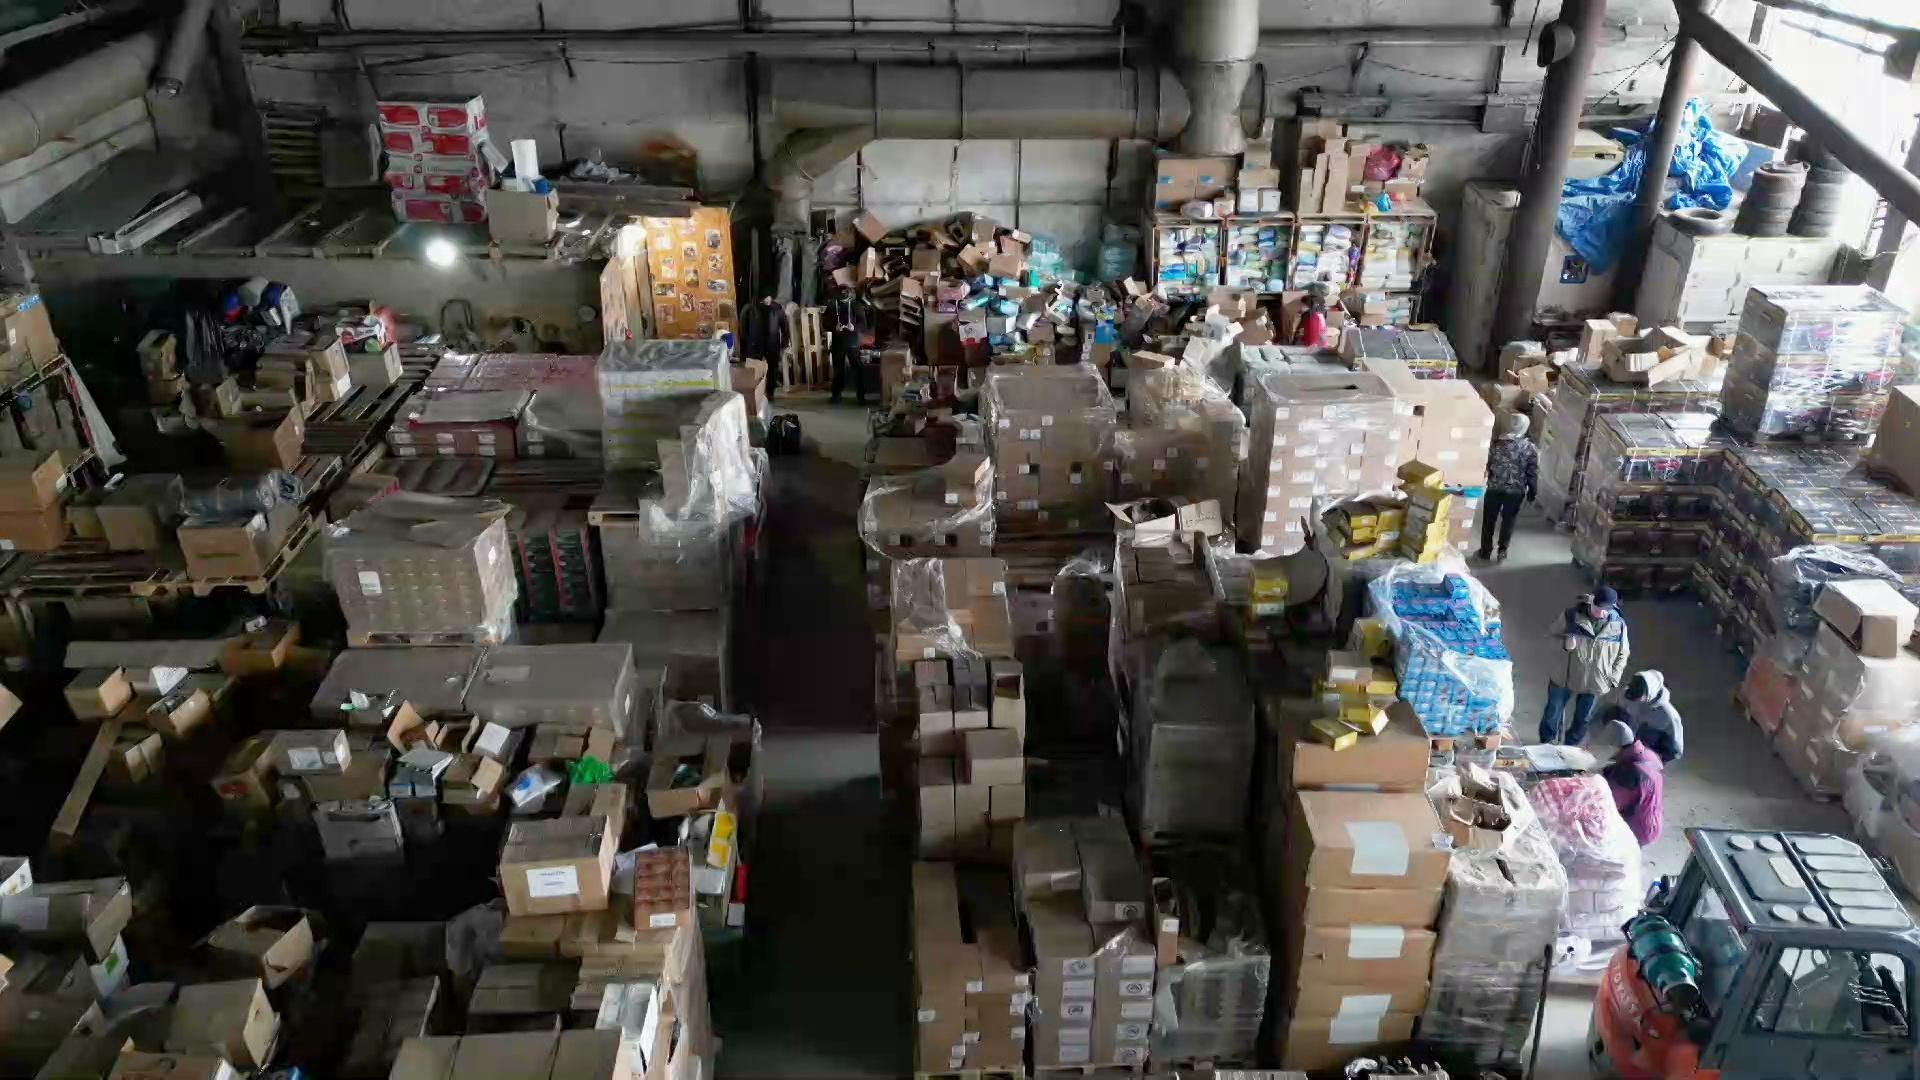 A still image from a video shows an overhead view of a warehouse in Ukraine with several individuals standing among stacks of crates and boxes, and a forklift.